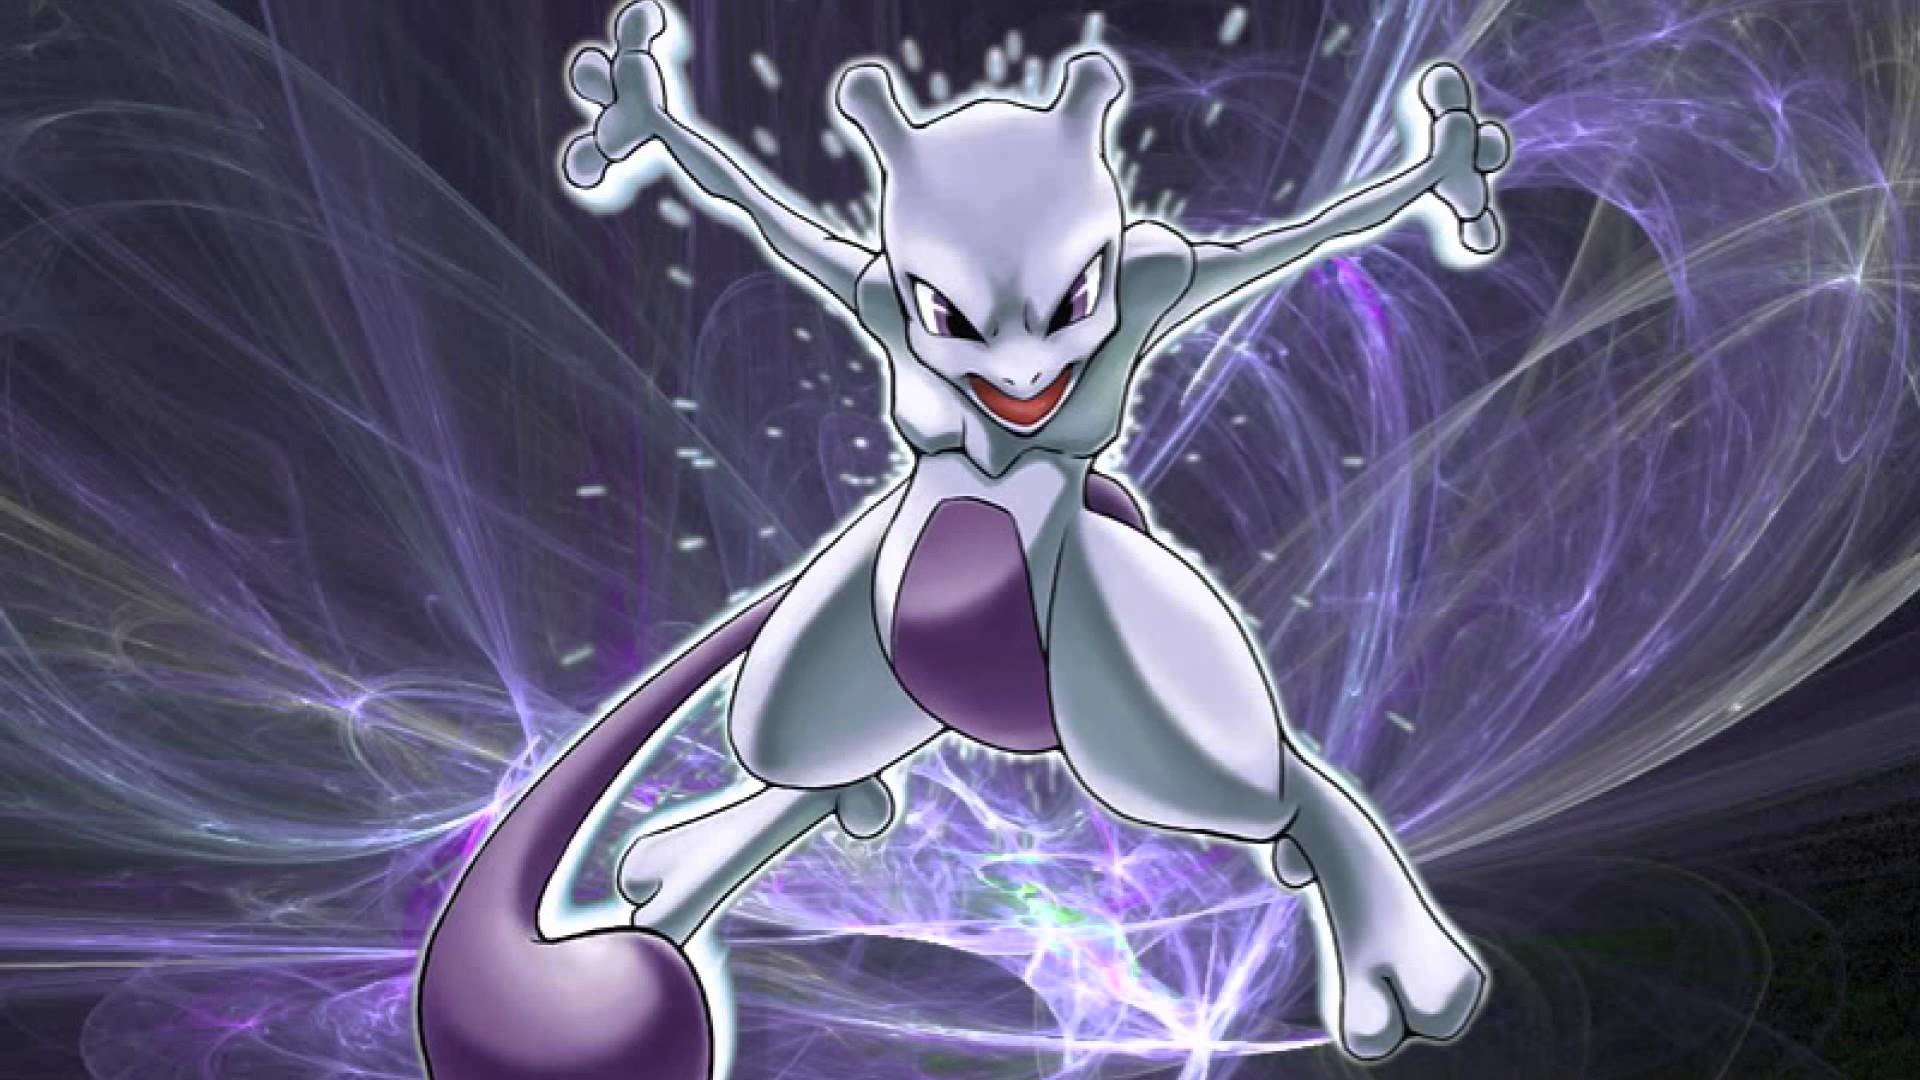 Japdora The White Pokemon Wallpaper 3668362 Background Mewtwo Pictures  Background Image And Wallpaper for Free Download